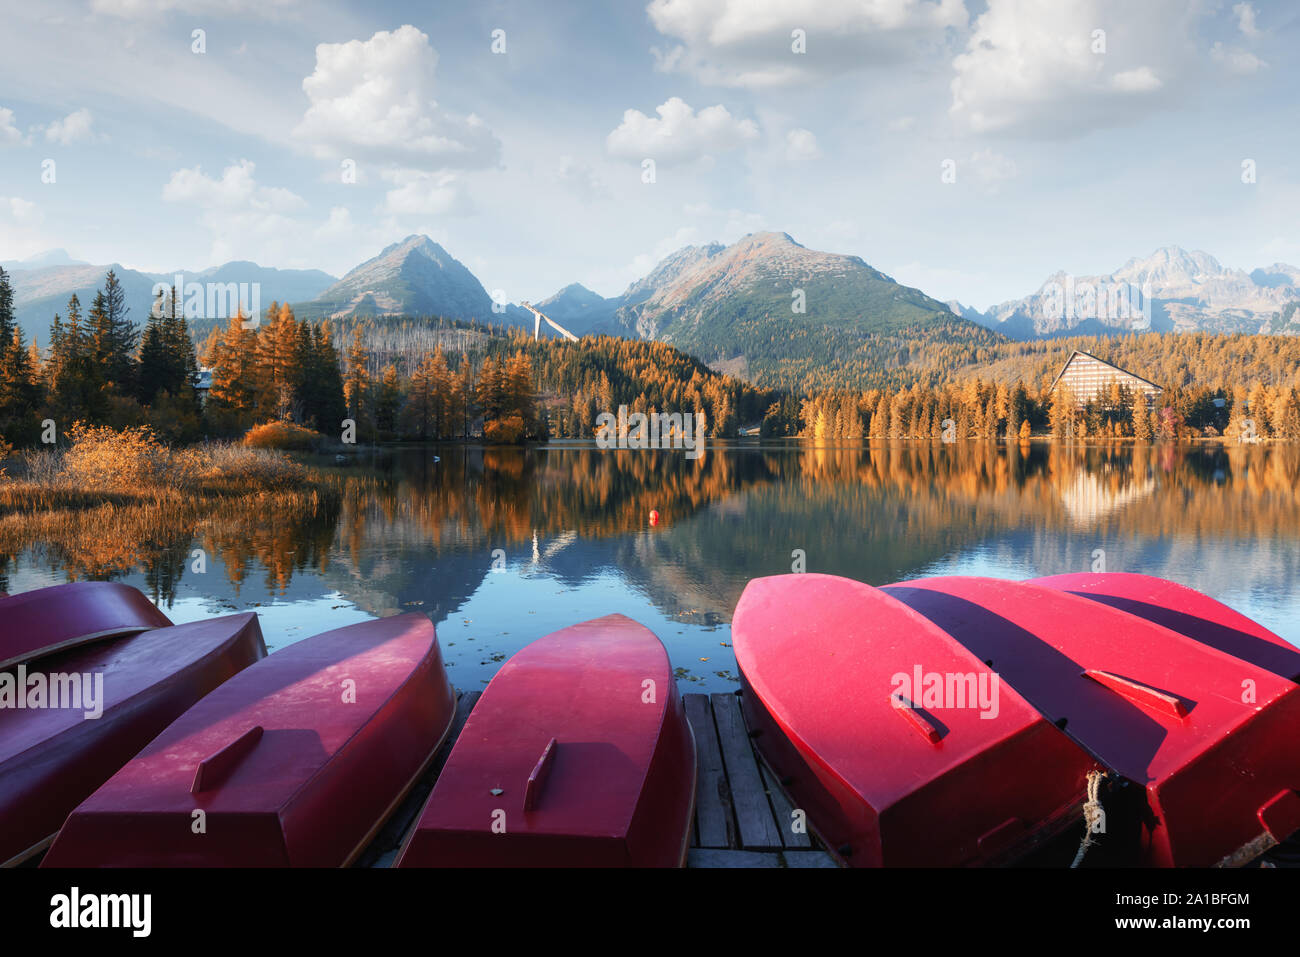 Picturesque autumn landscape with row of red wooden boats and high mountains on background. Strbske pleso lake in High Tatras National Park, Slovakia Stock Photo